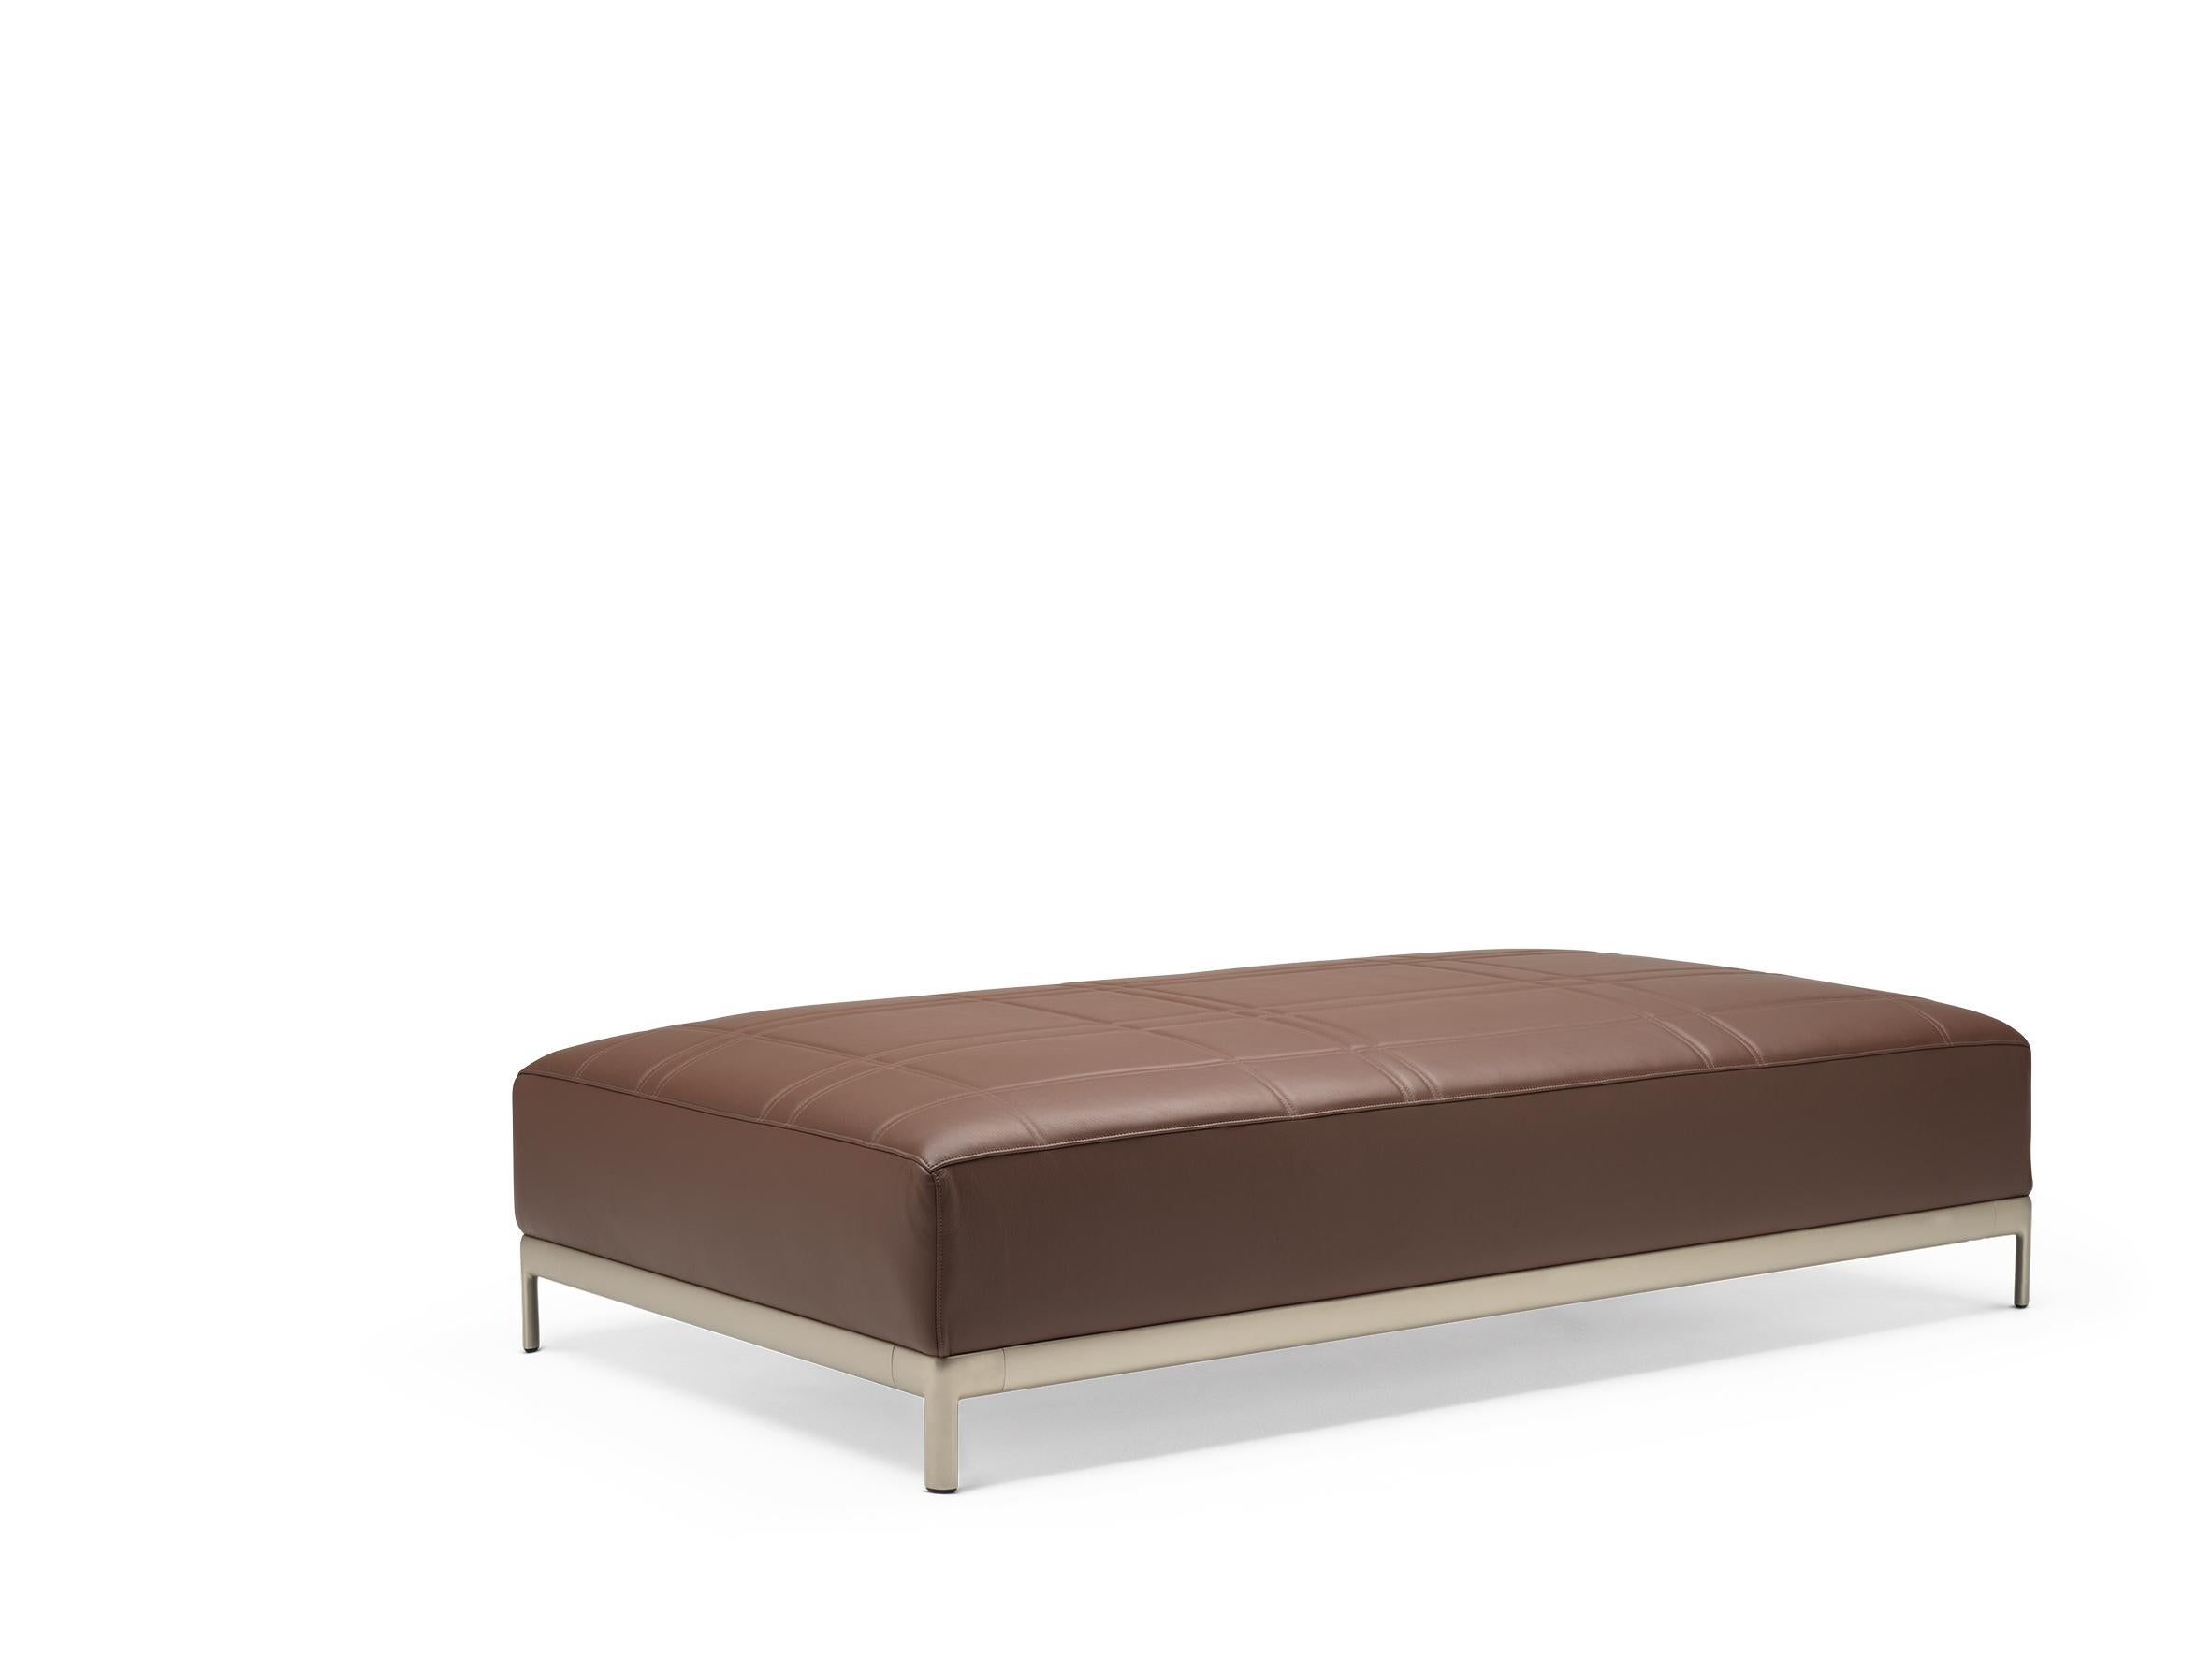 Alias P52 AluZen Soft Bench in Brown Leather Seat and Anodized Gold Frame by Ludovica+Roberto Palomba

Bench with structure in lacquered or polished aluminium.Seat with removable quilted cover in fabric or leather.

Ludovica + Roberto Palomba,